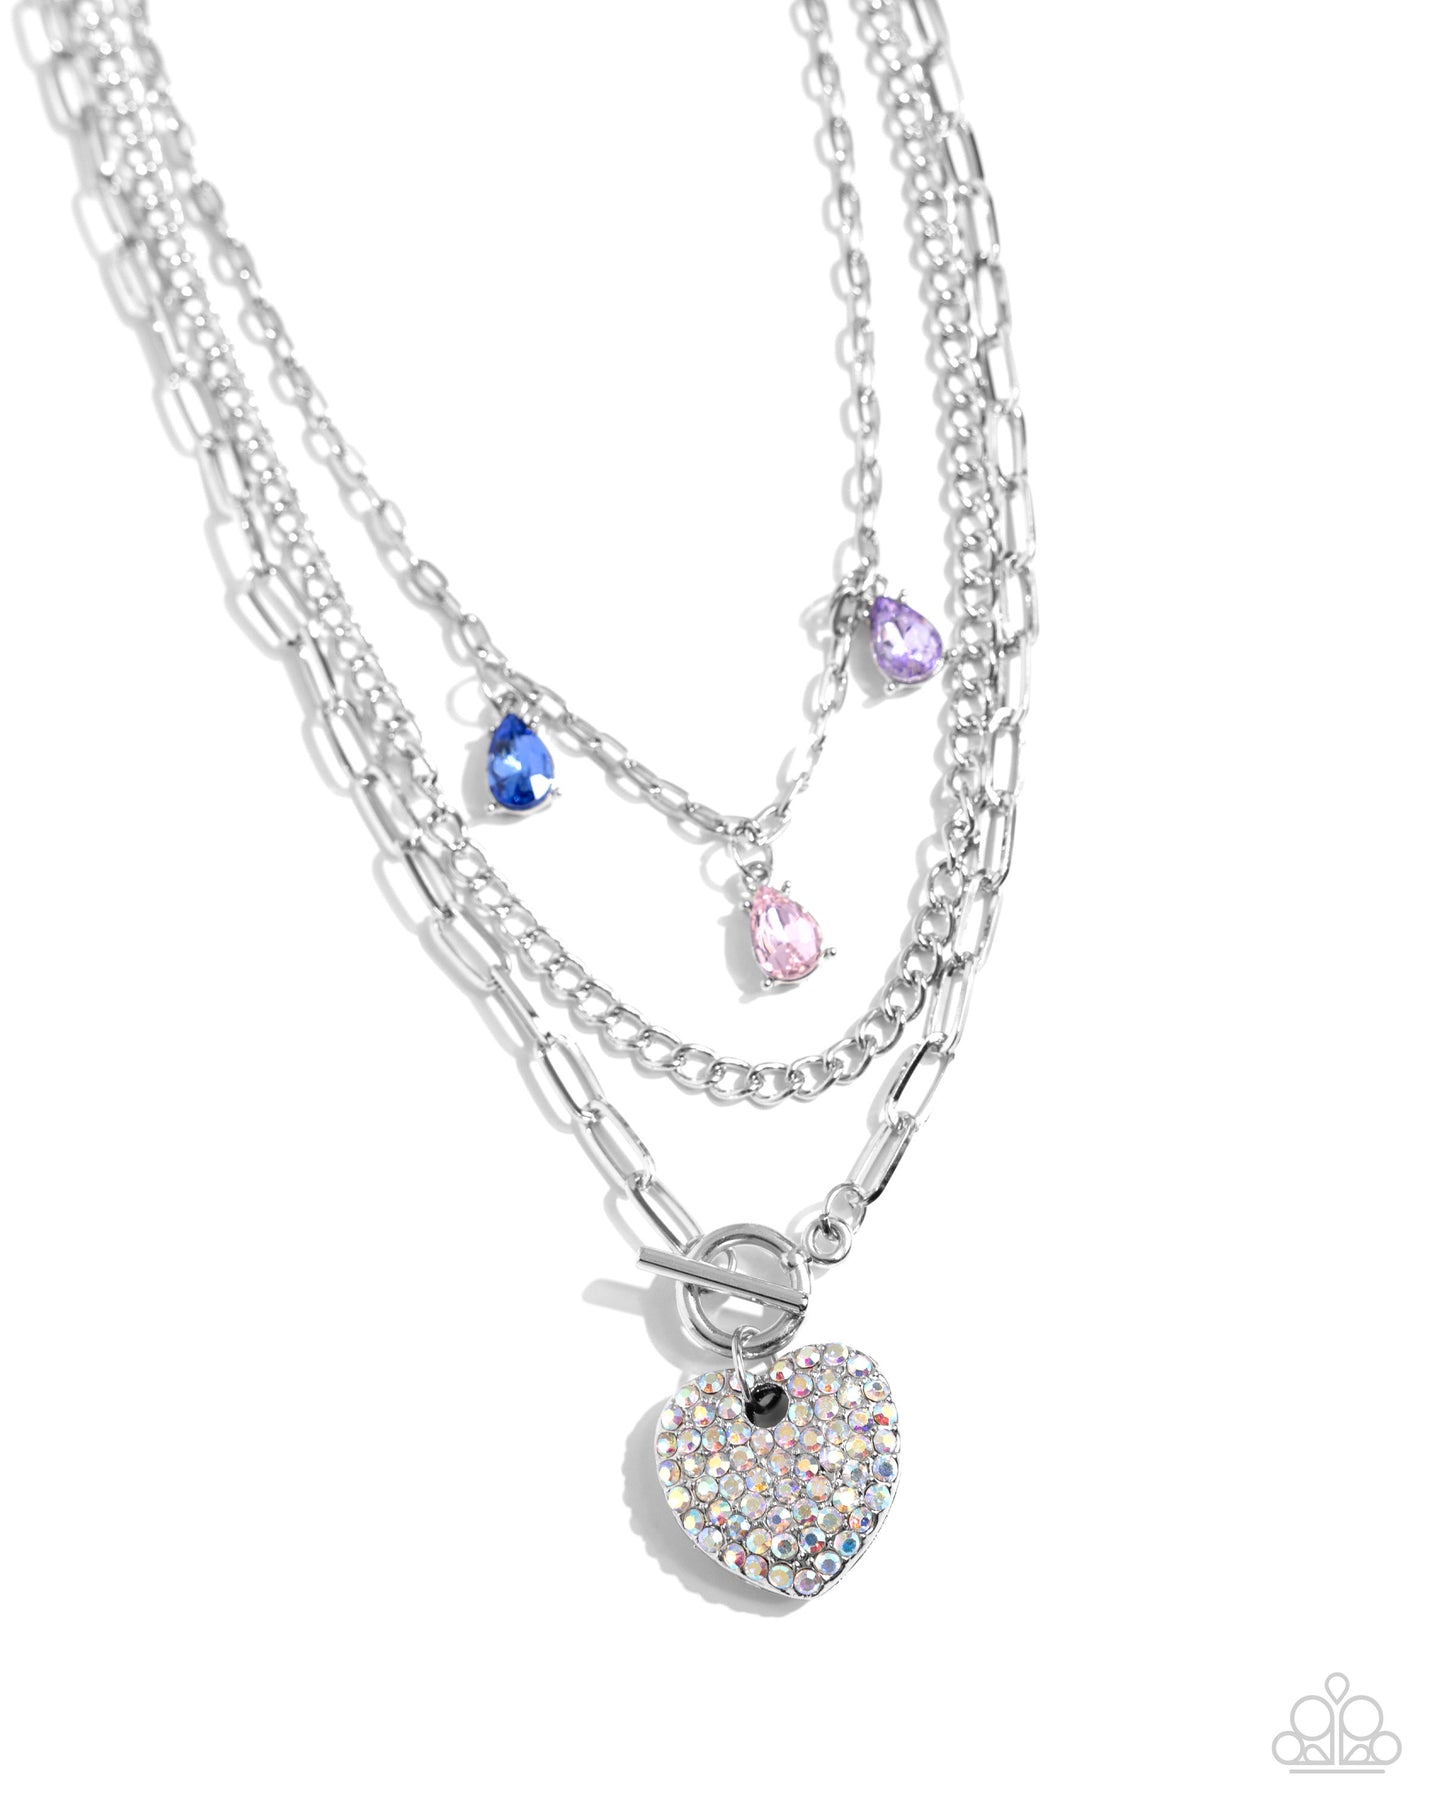 <p>Three mismatched silver chains layer and loop around the neckline. A purple, light pink, and blue teardrop gem in silver-pronged fittings dangle from the uppermost chain while an iridescent-rhinestone encrusted heart pendant loops through the lowermost chain for a radiantly, romantic statement. Features an adjustable clasp closure. Due to its prismatic palette, color may vary.</p> <p><i> Sold as one individual necklace. Includes one pair of matching earrings.</i></p>